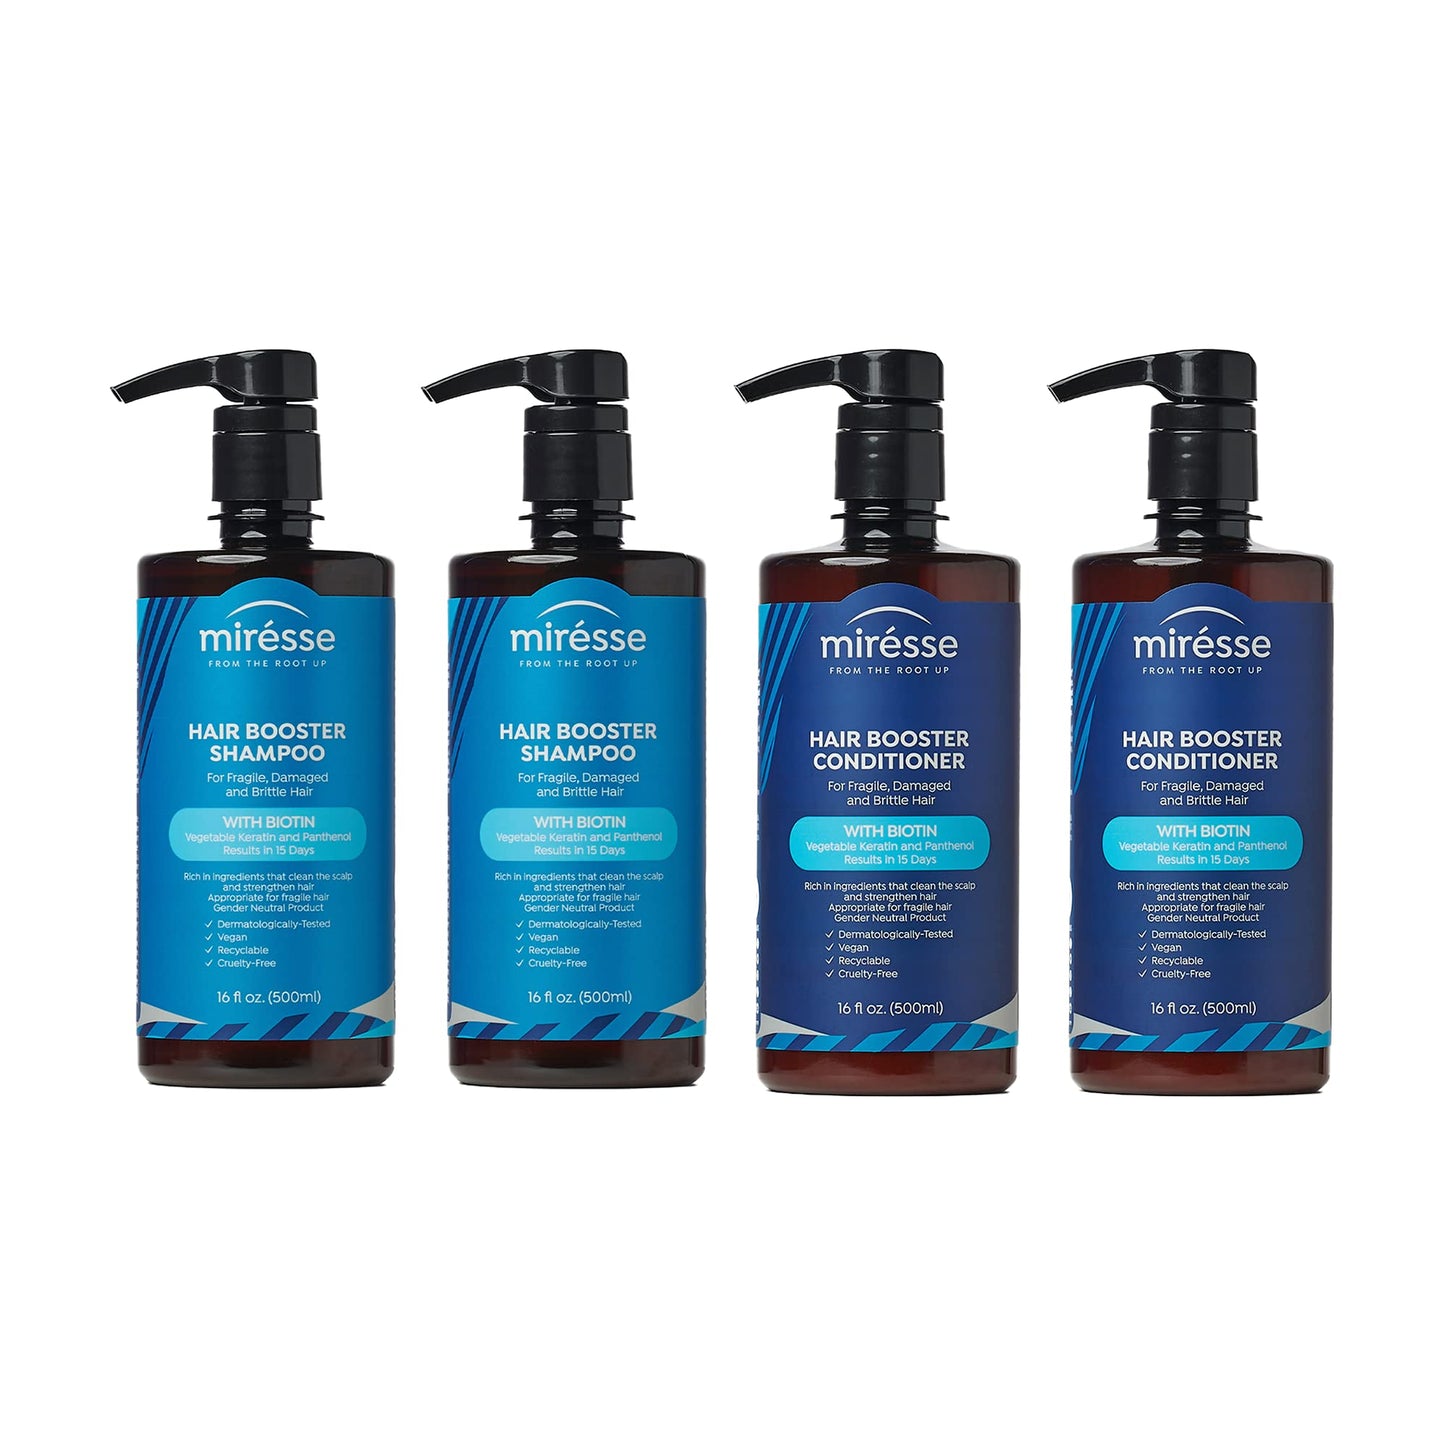 MIRÉSSE - Pack of 4 Booster (2 Shampoos + 2 Conditioners) - Tonic for Oily Hair - Biotin Treatment - Vegan and Cruelty-Free - Proven Result - 64 Fl oz